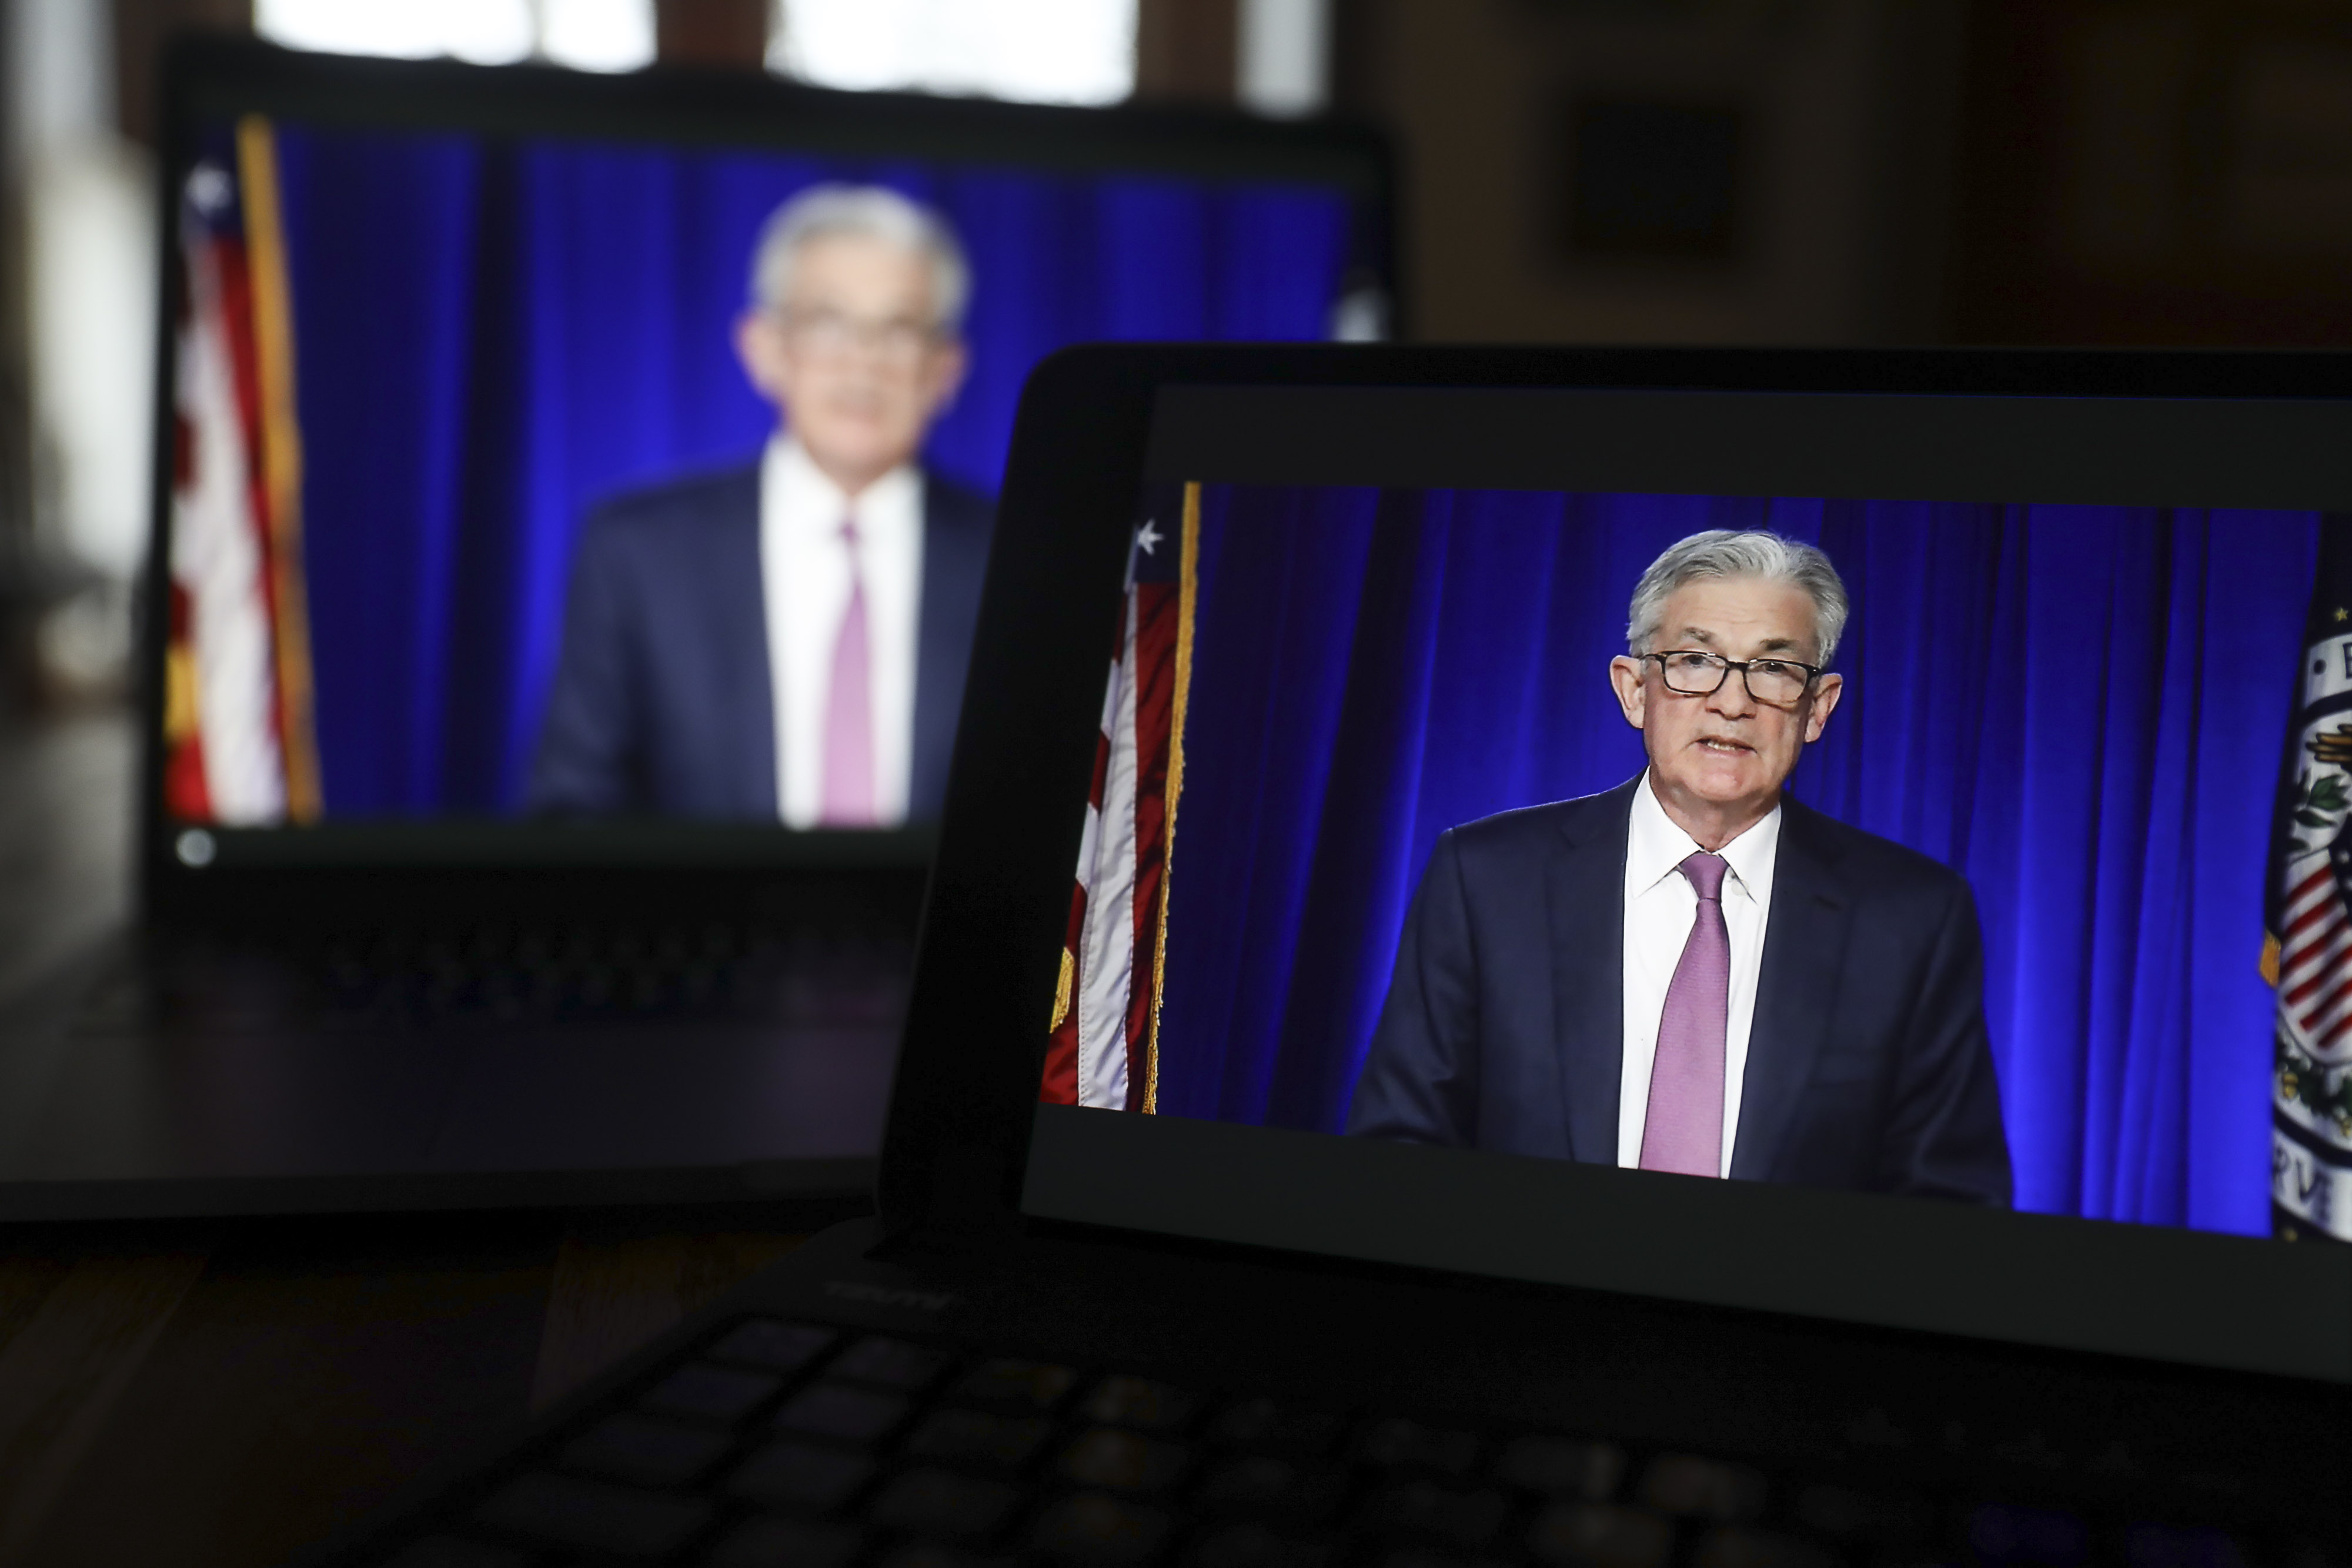 Jerome Powell, chairman of the U.S. Federal Reserve, speaks during a virtual news conference in Tiskilwa, Illinois, U.S., on Wednesday, Dec. 16, 2020.&nbsp;